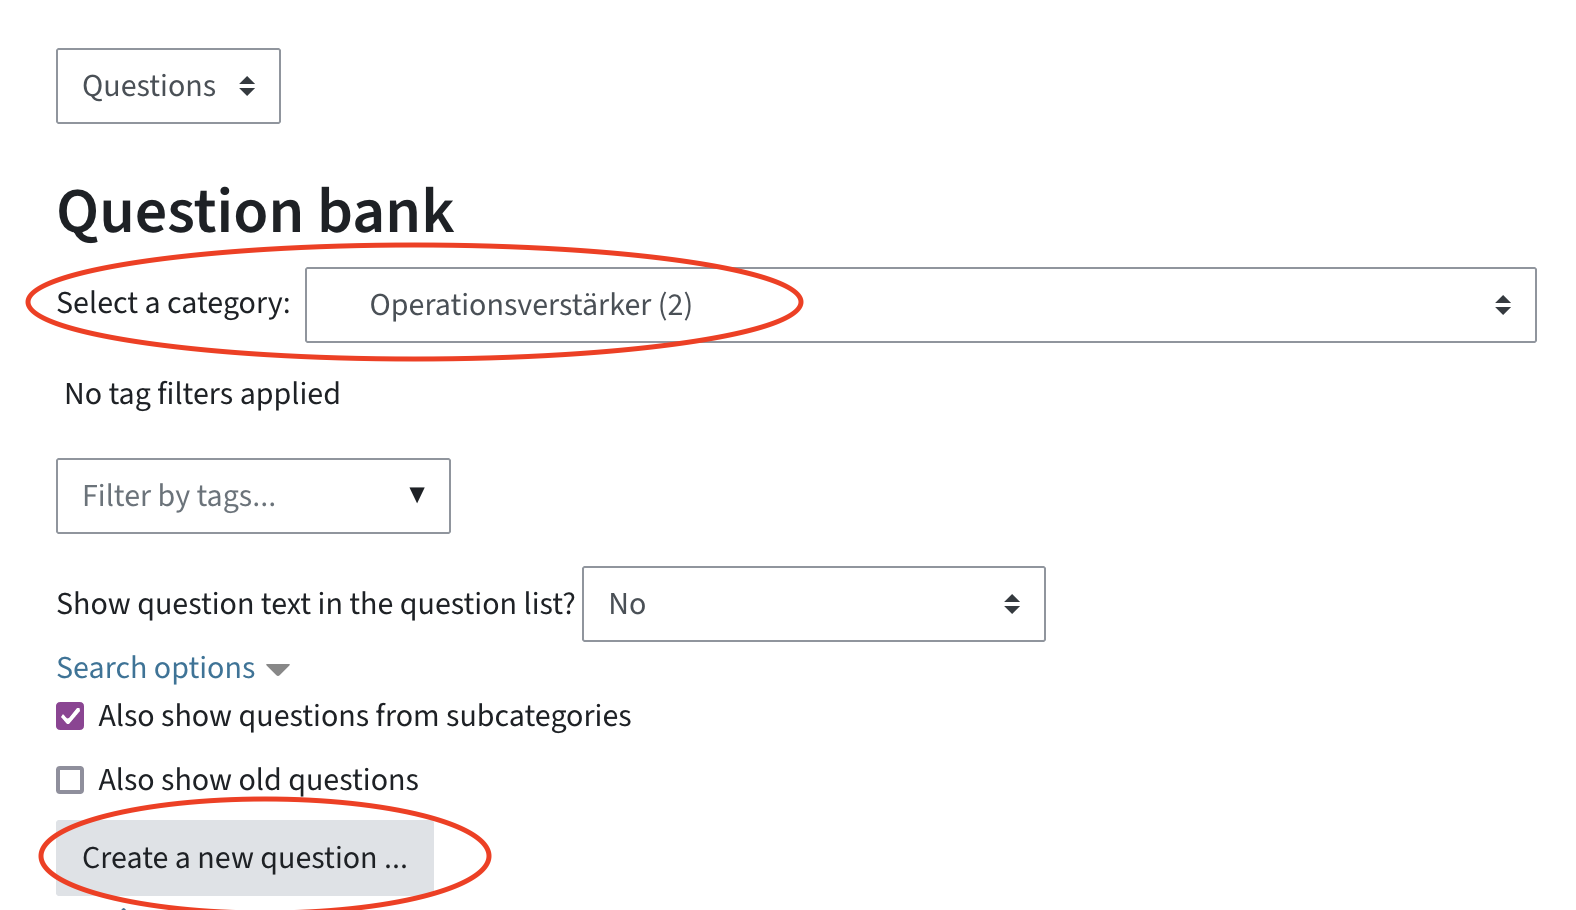 Screenshot of the Questions menu in the question bank. You can select a category and use the button Create a new question to create a new question.